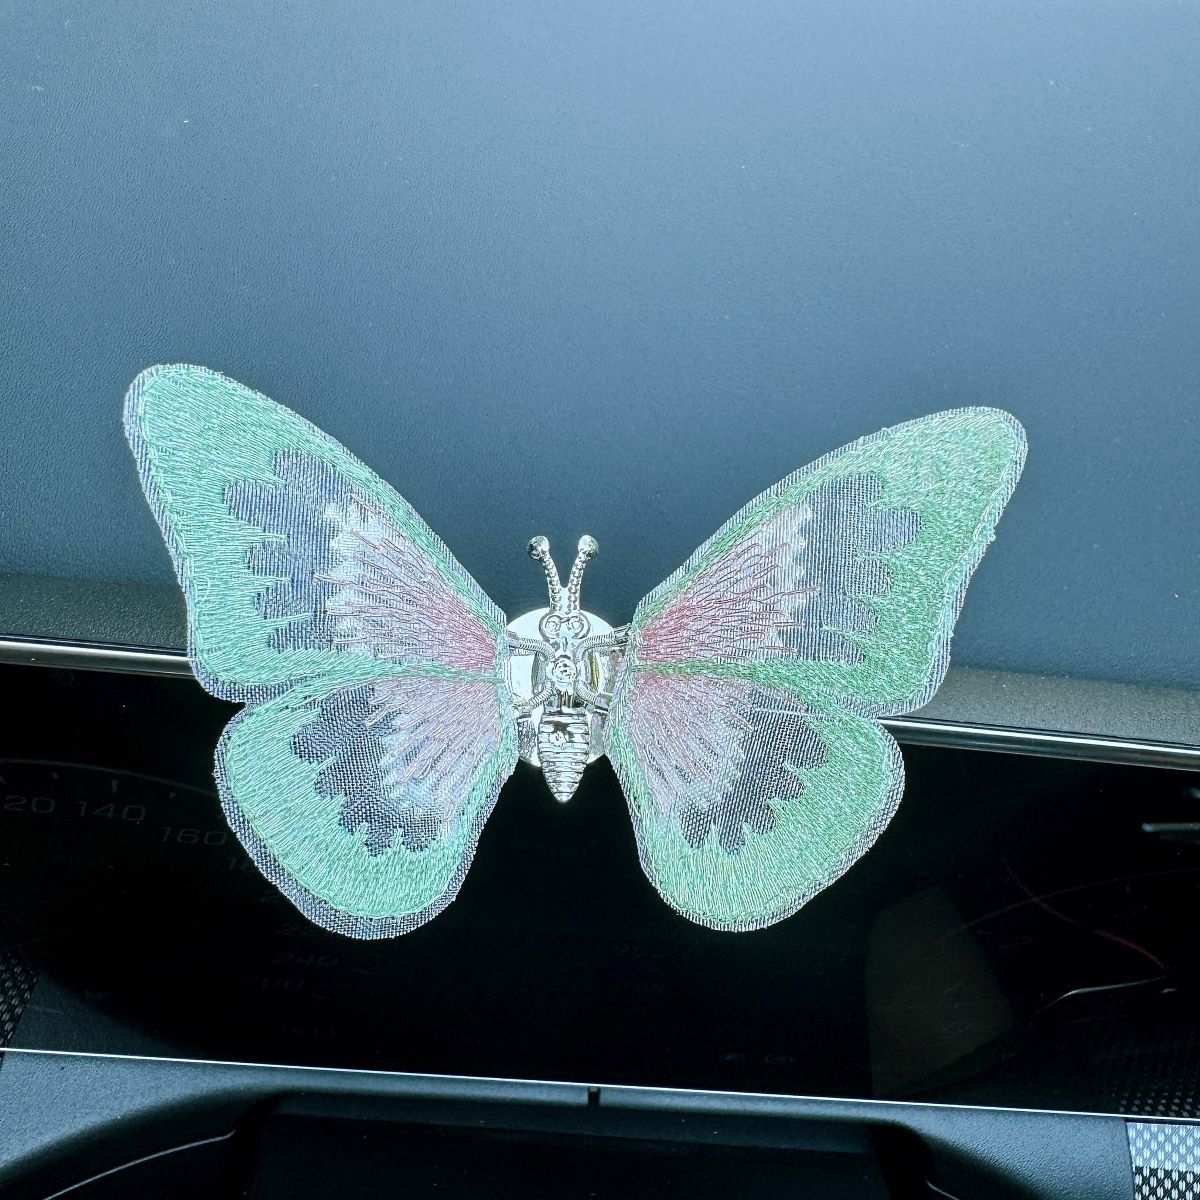 Moving butterfly car center console air outlet decoration car small ornaments healing car interior decoration creativity